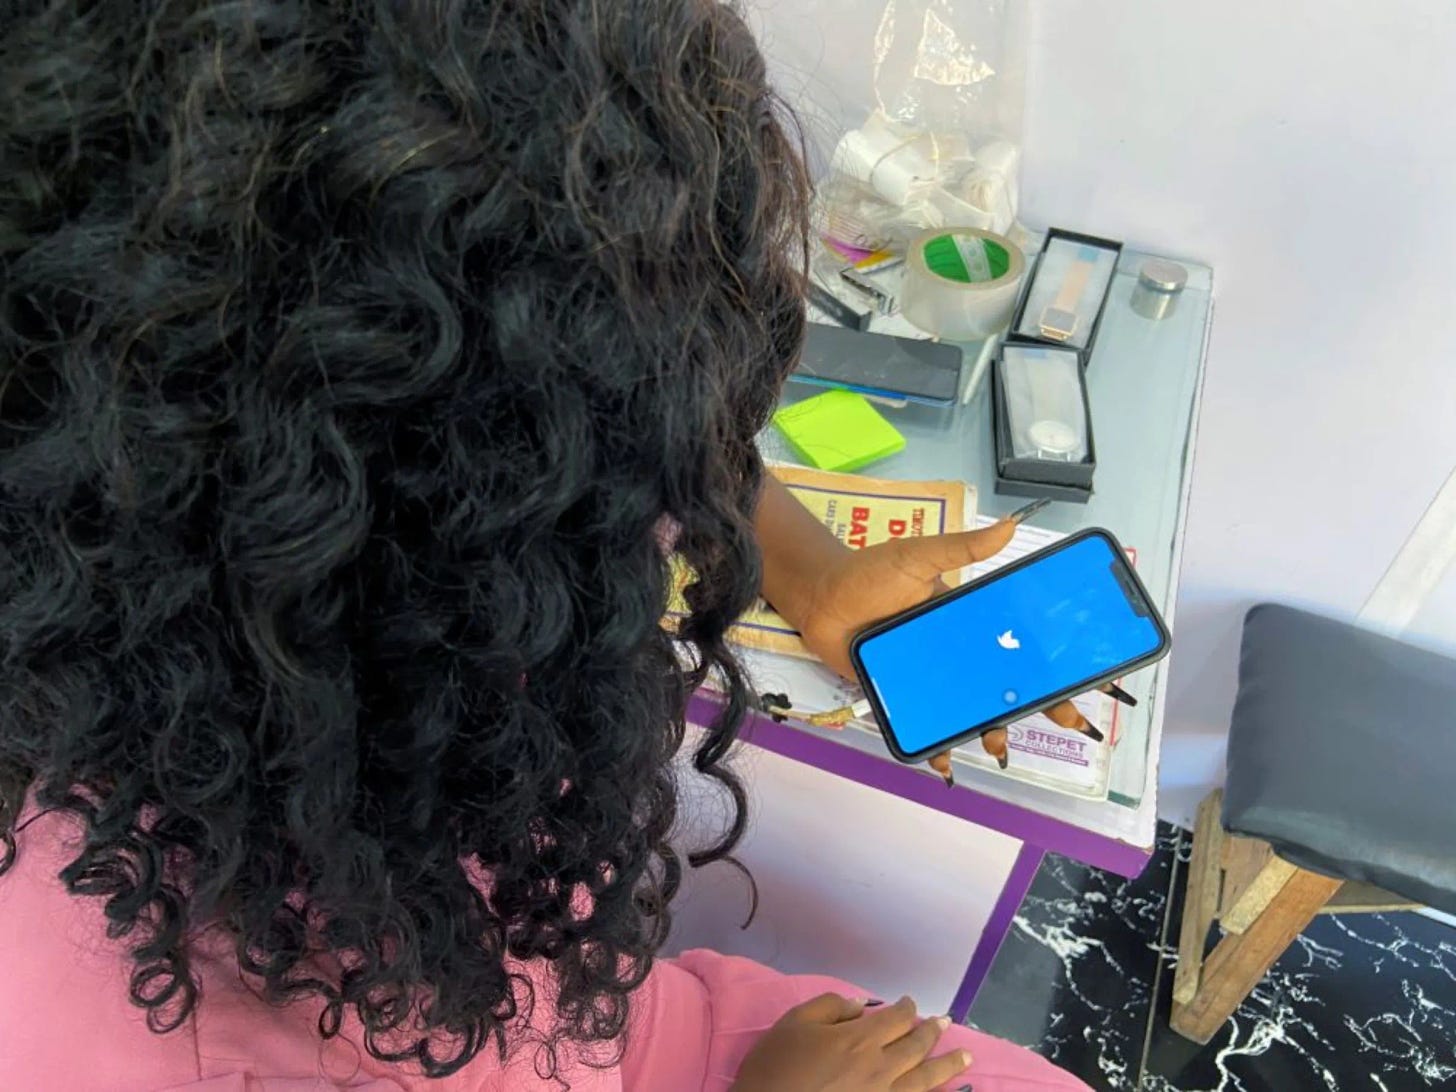 A women opens the Twitter app on a smart phone at her office in Lagos, Nigeria June 10, 2021